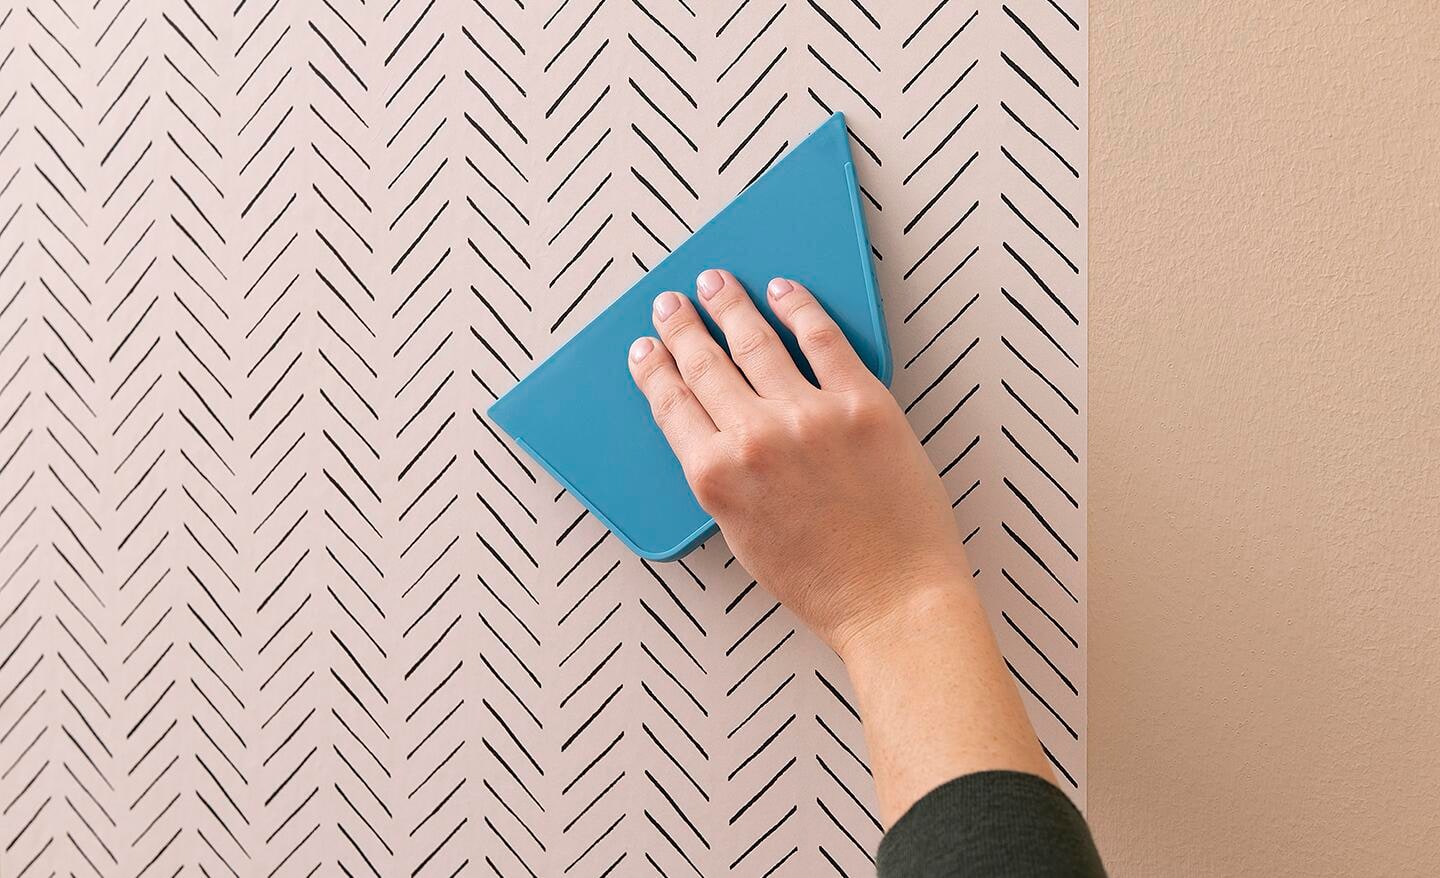 Someone installing wallpaper with a blue plastic smoother.